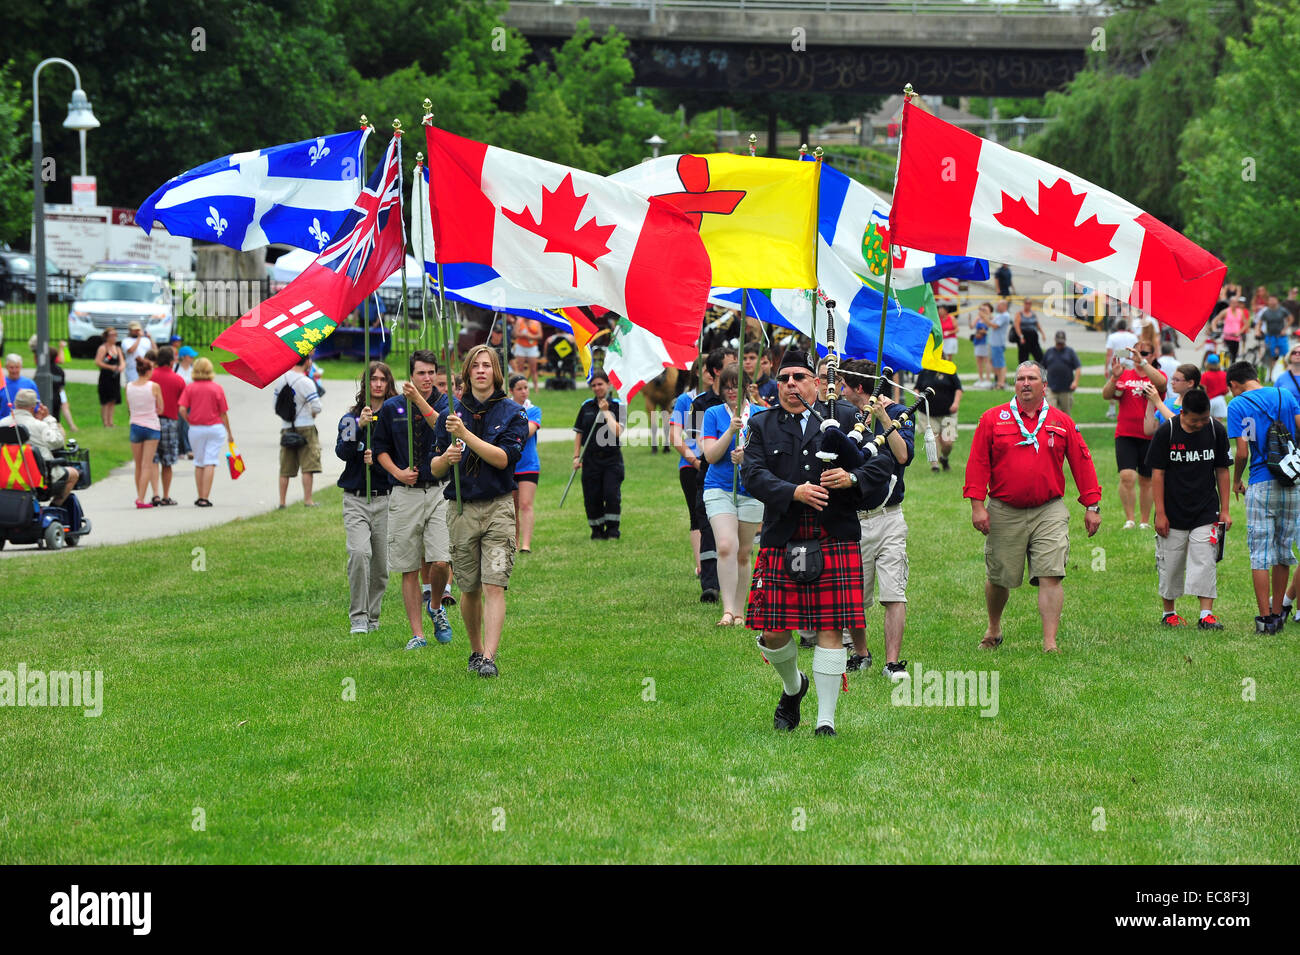 A bagpiper leads a precession of Canadian flags at a Canada Day celebration held in park in London, Ontario. Stock Photo